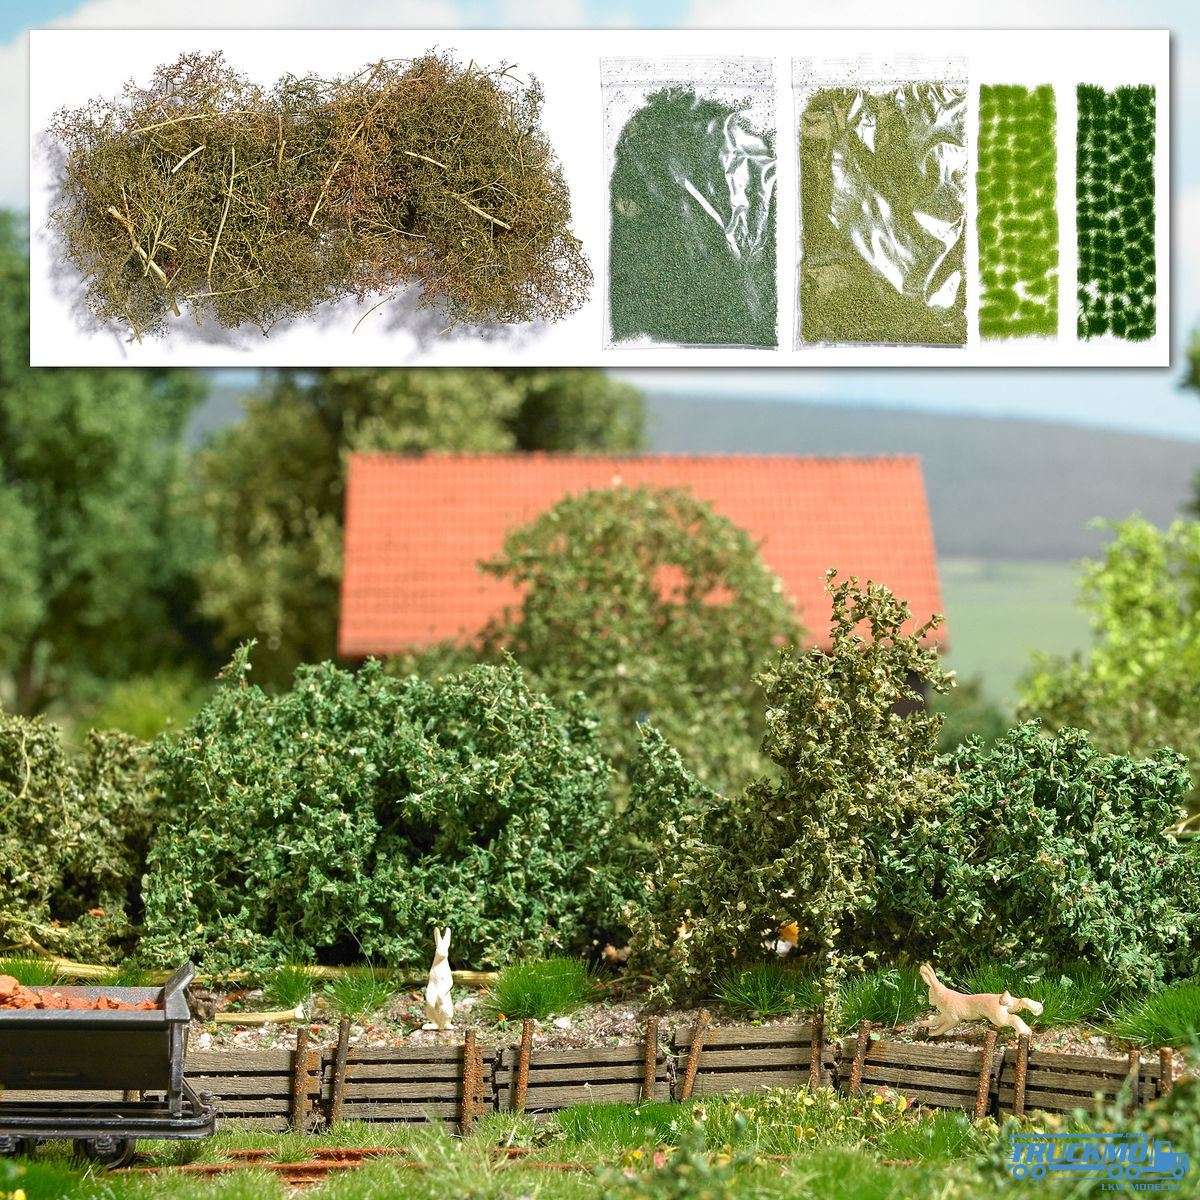 Busch planting set for forest edge undergrowth or embankment 6804